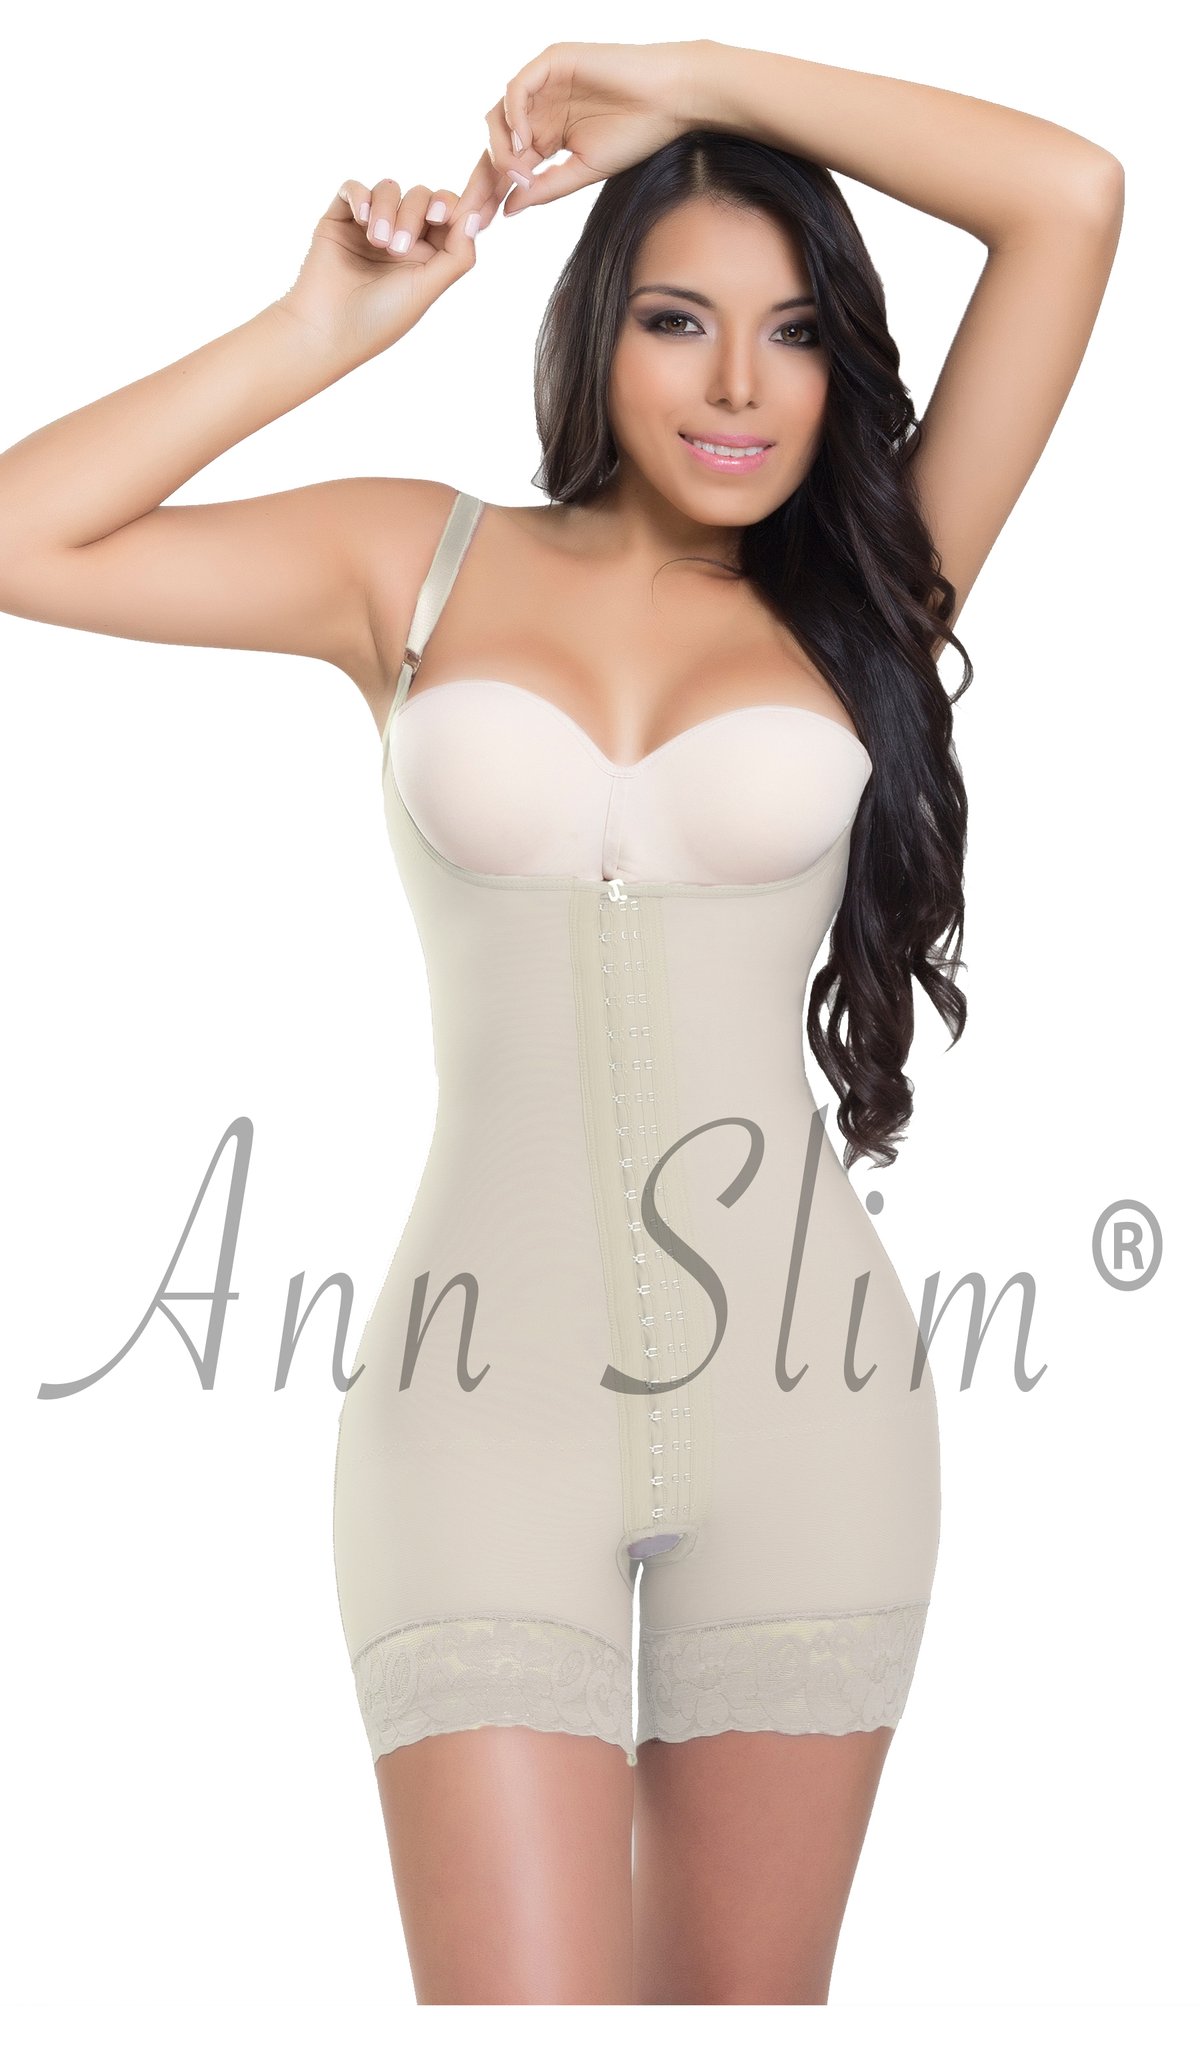 Ann Michell Anny Short Powernet Girdle with Open Holes 5033 